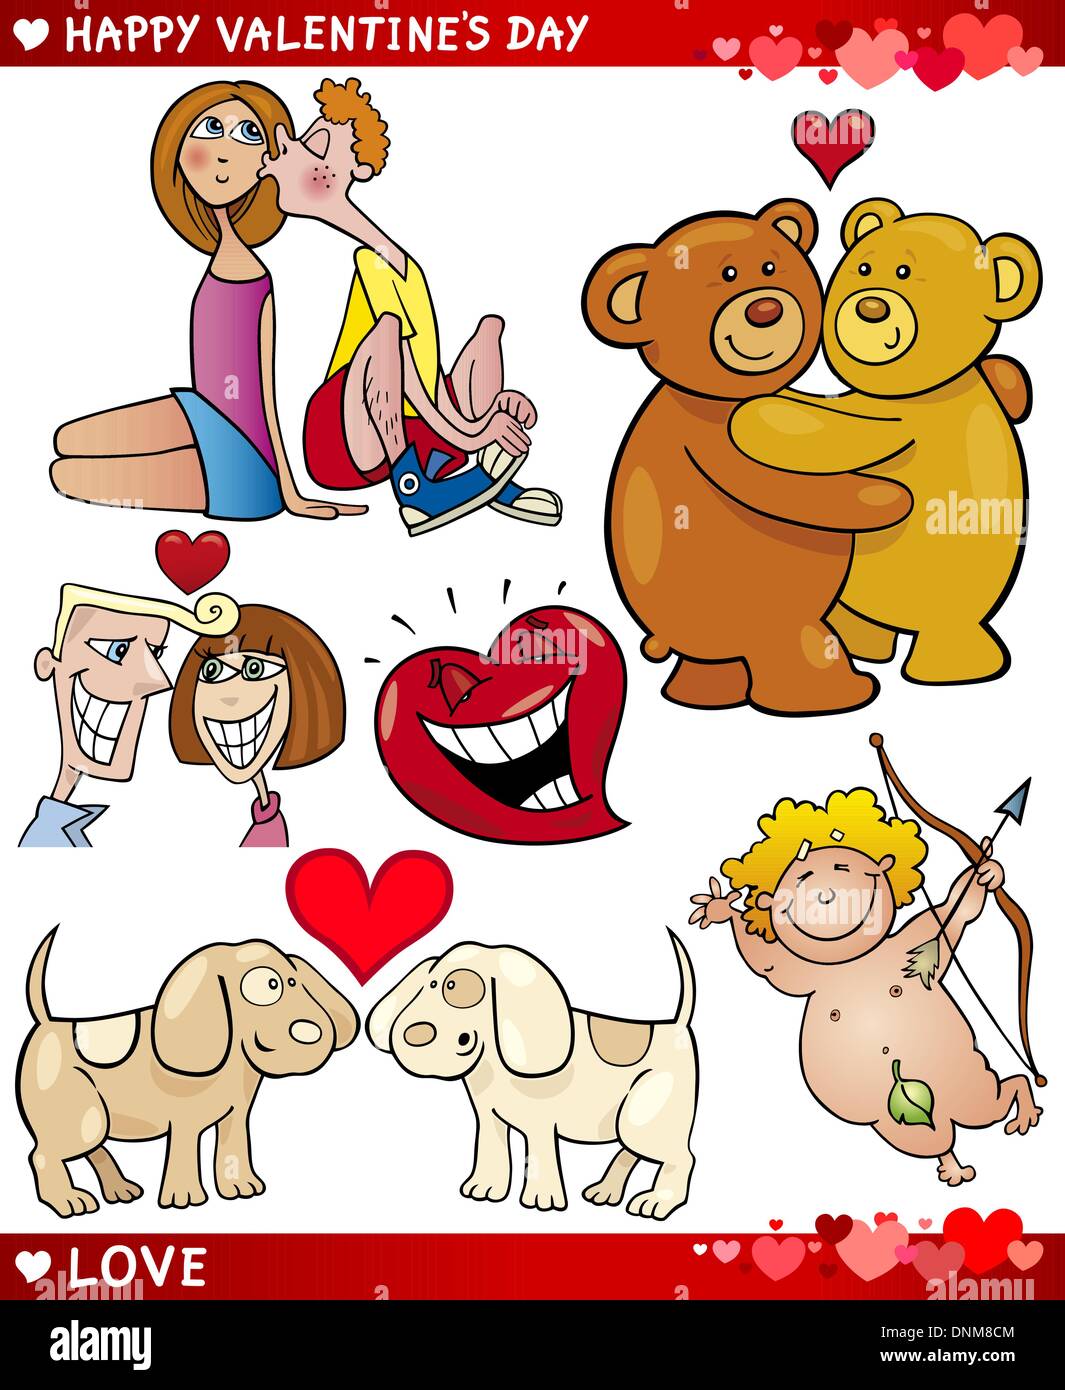 Cartoon Illustration of Cute Valentines Day and Love Themes Collection Set Stock Vector